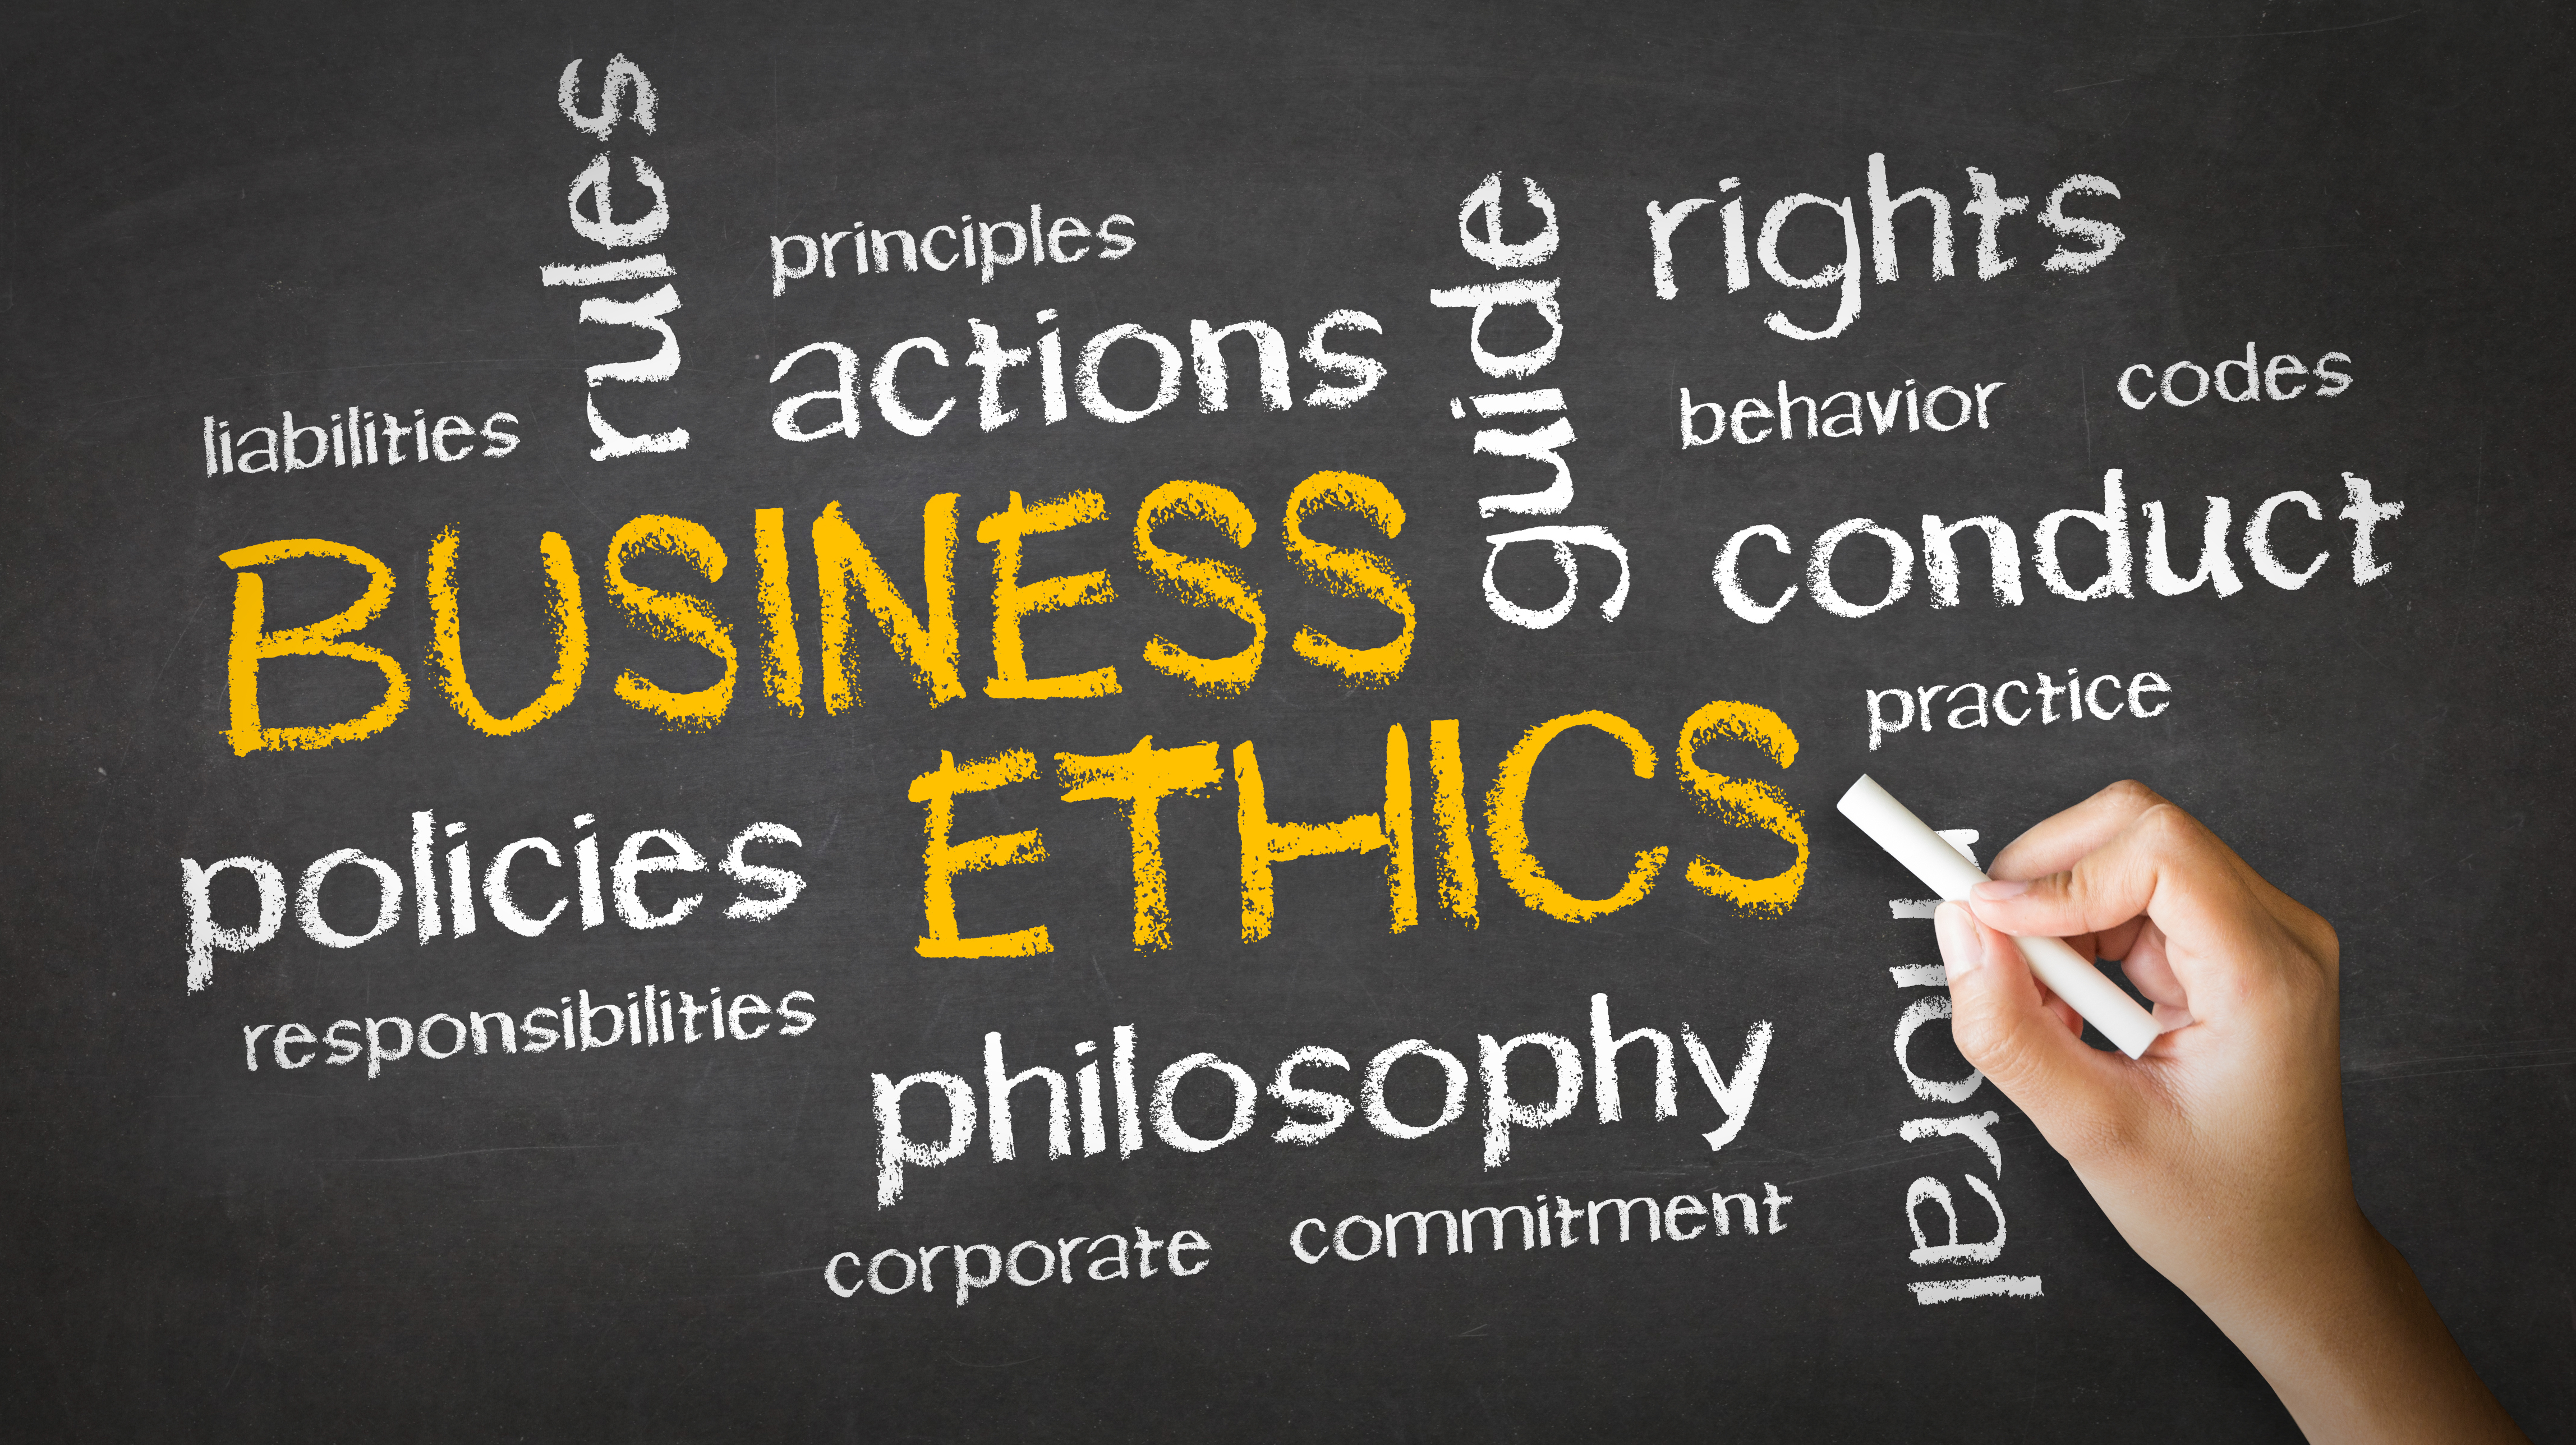 An Ethical Business Of An Organization Exporting